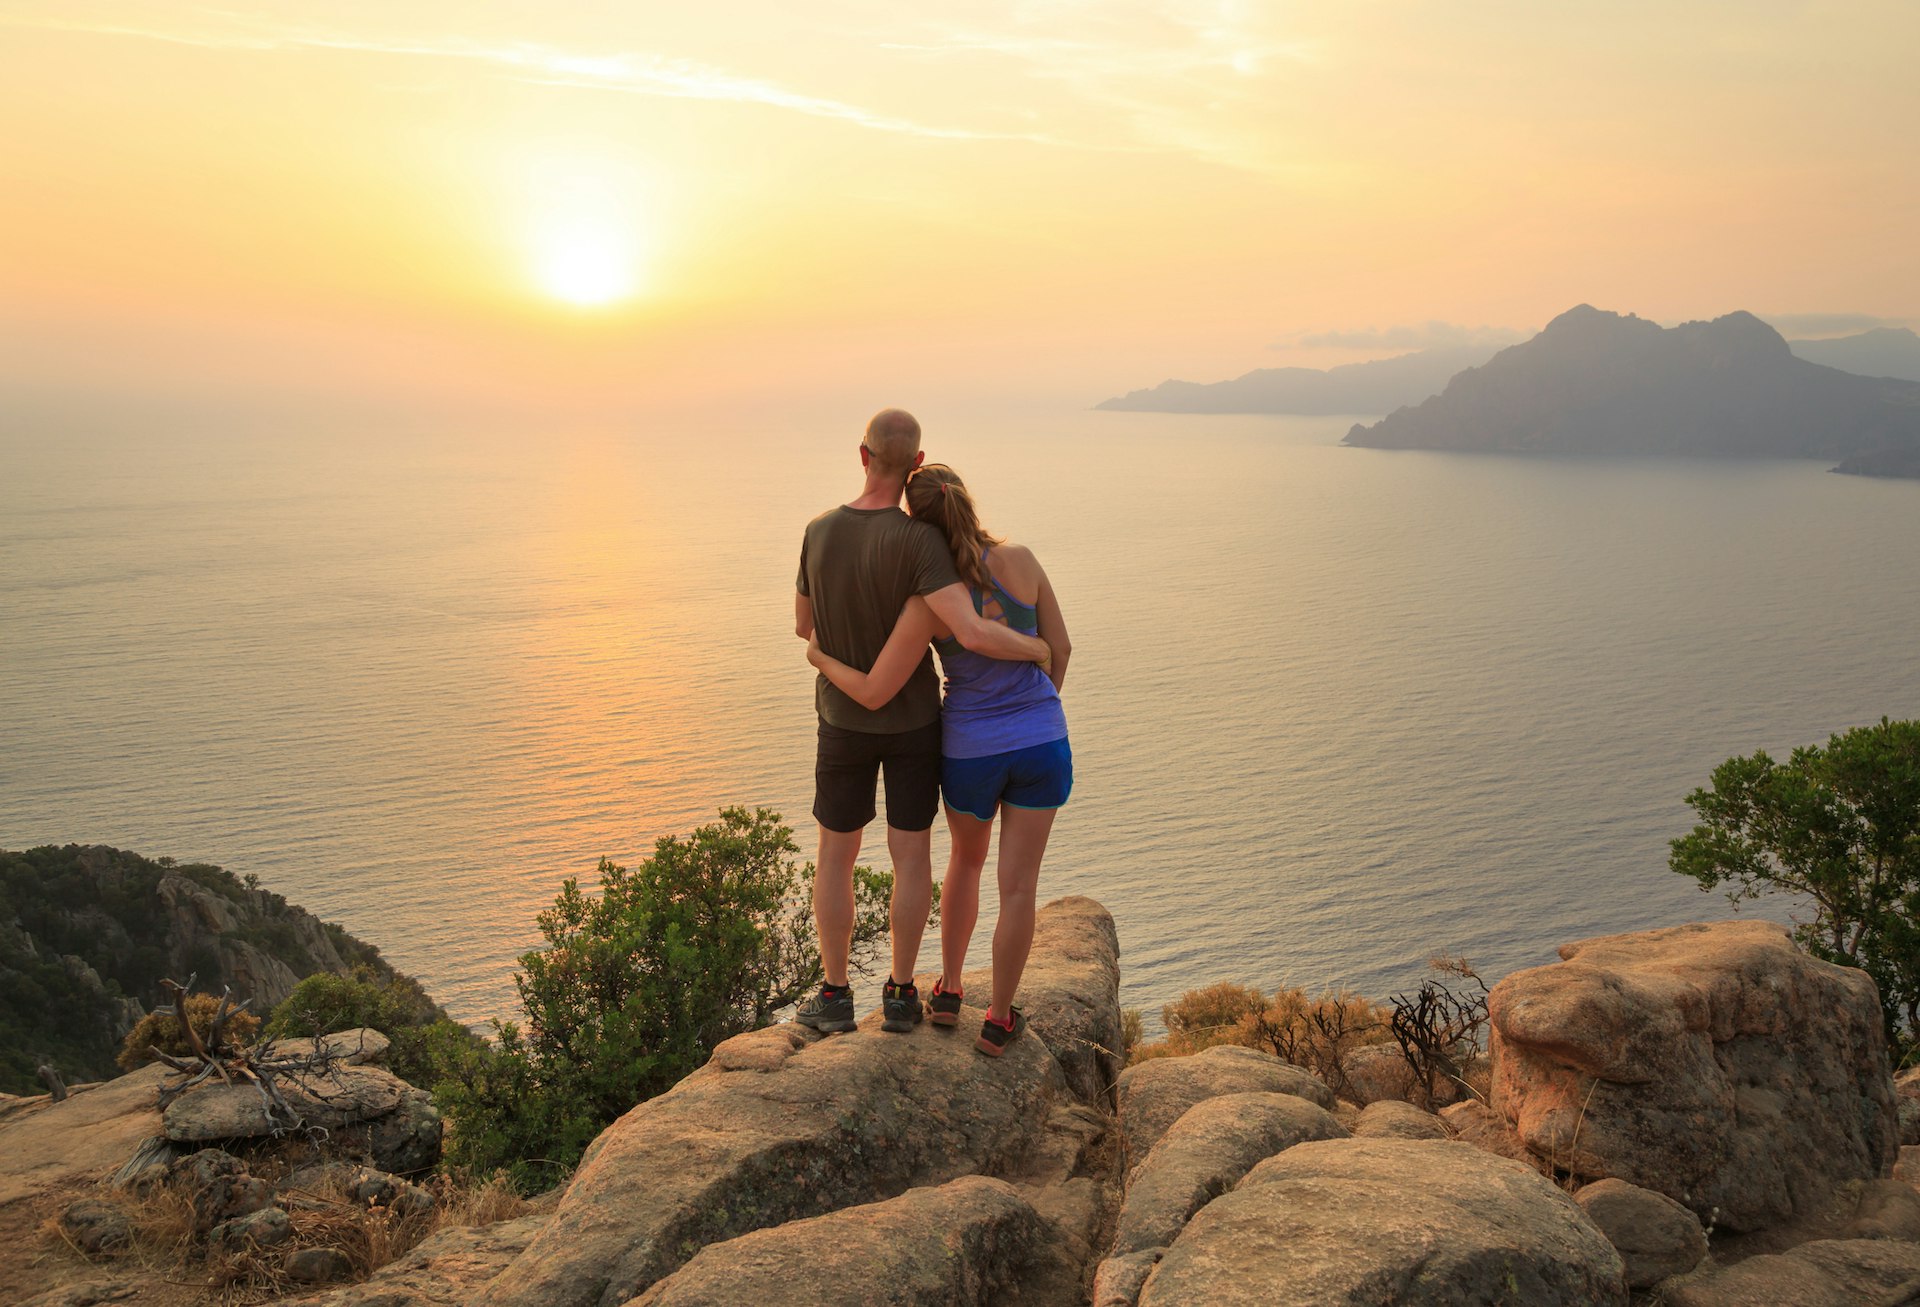 A couple enjoying the sunset over the Golf of Porto at Château Fort, Corsica, France